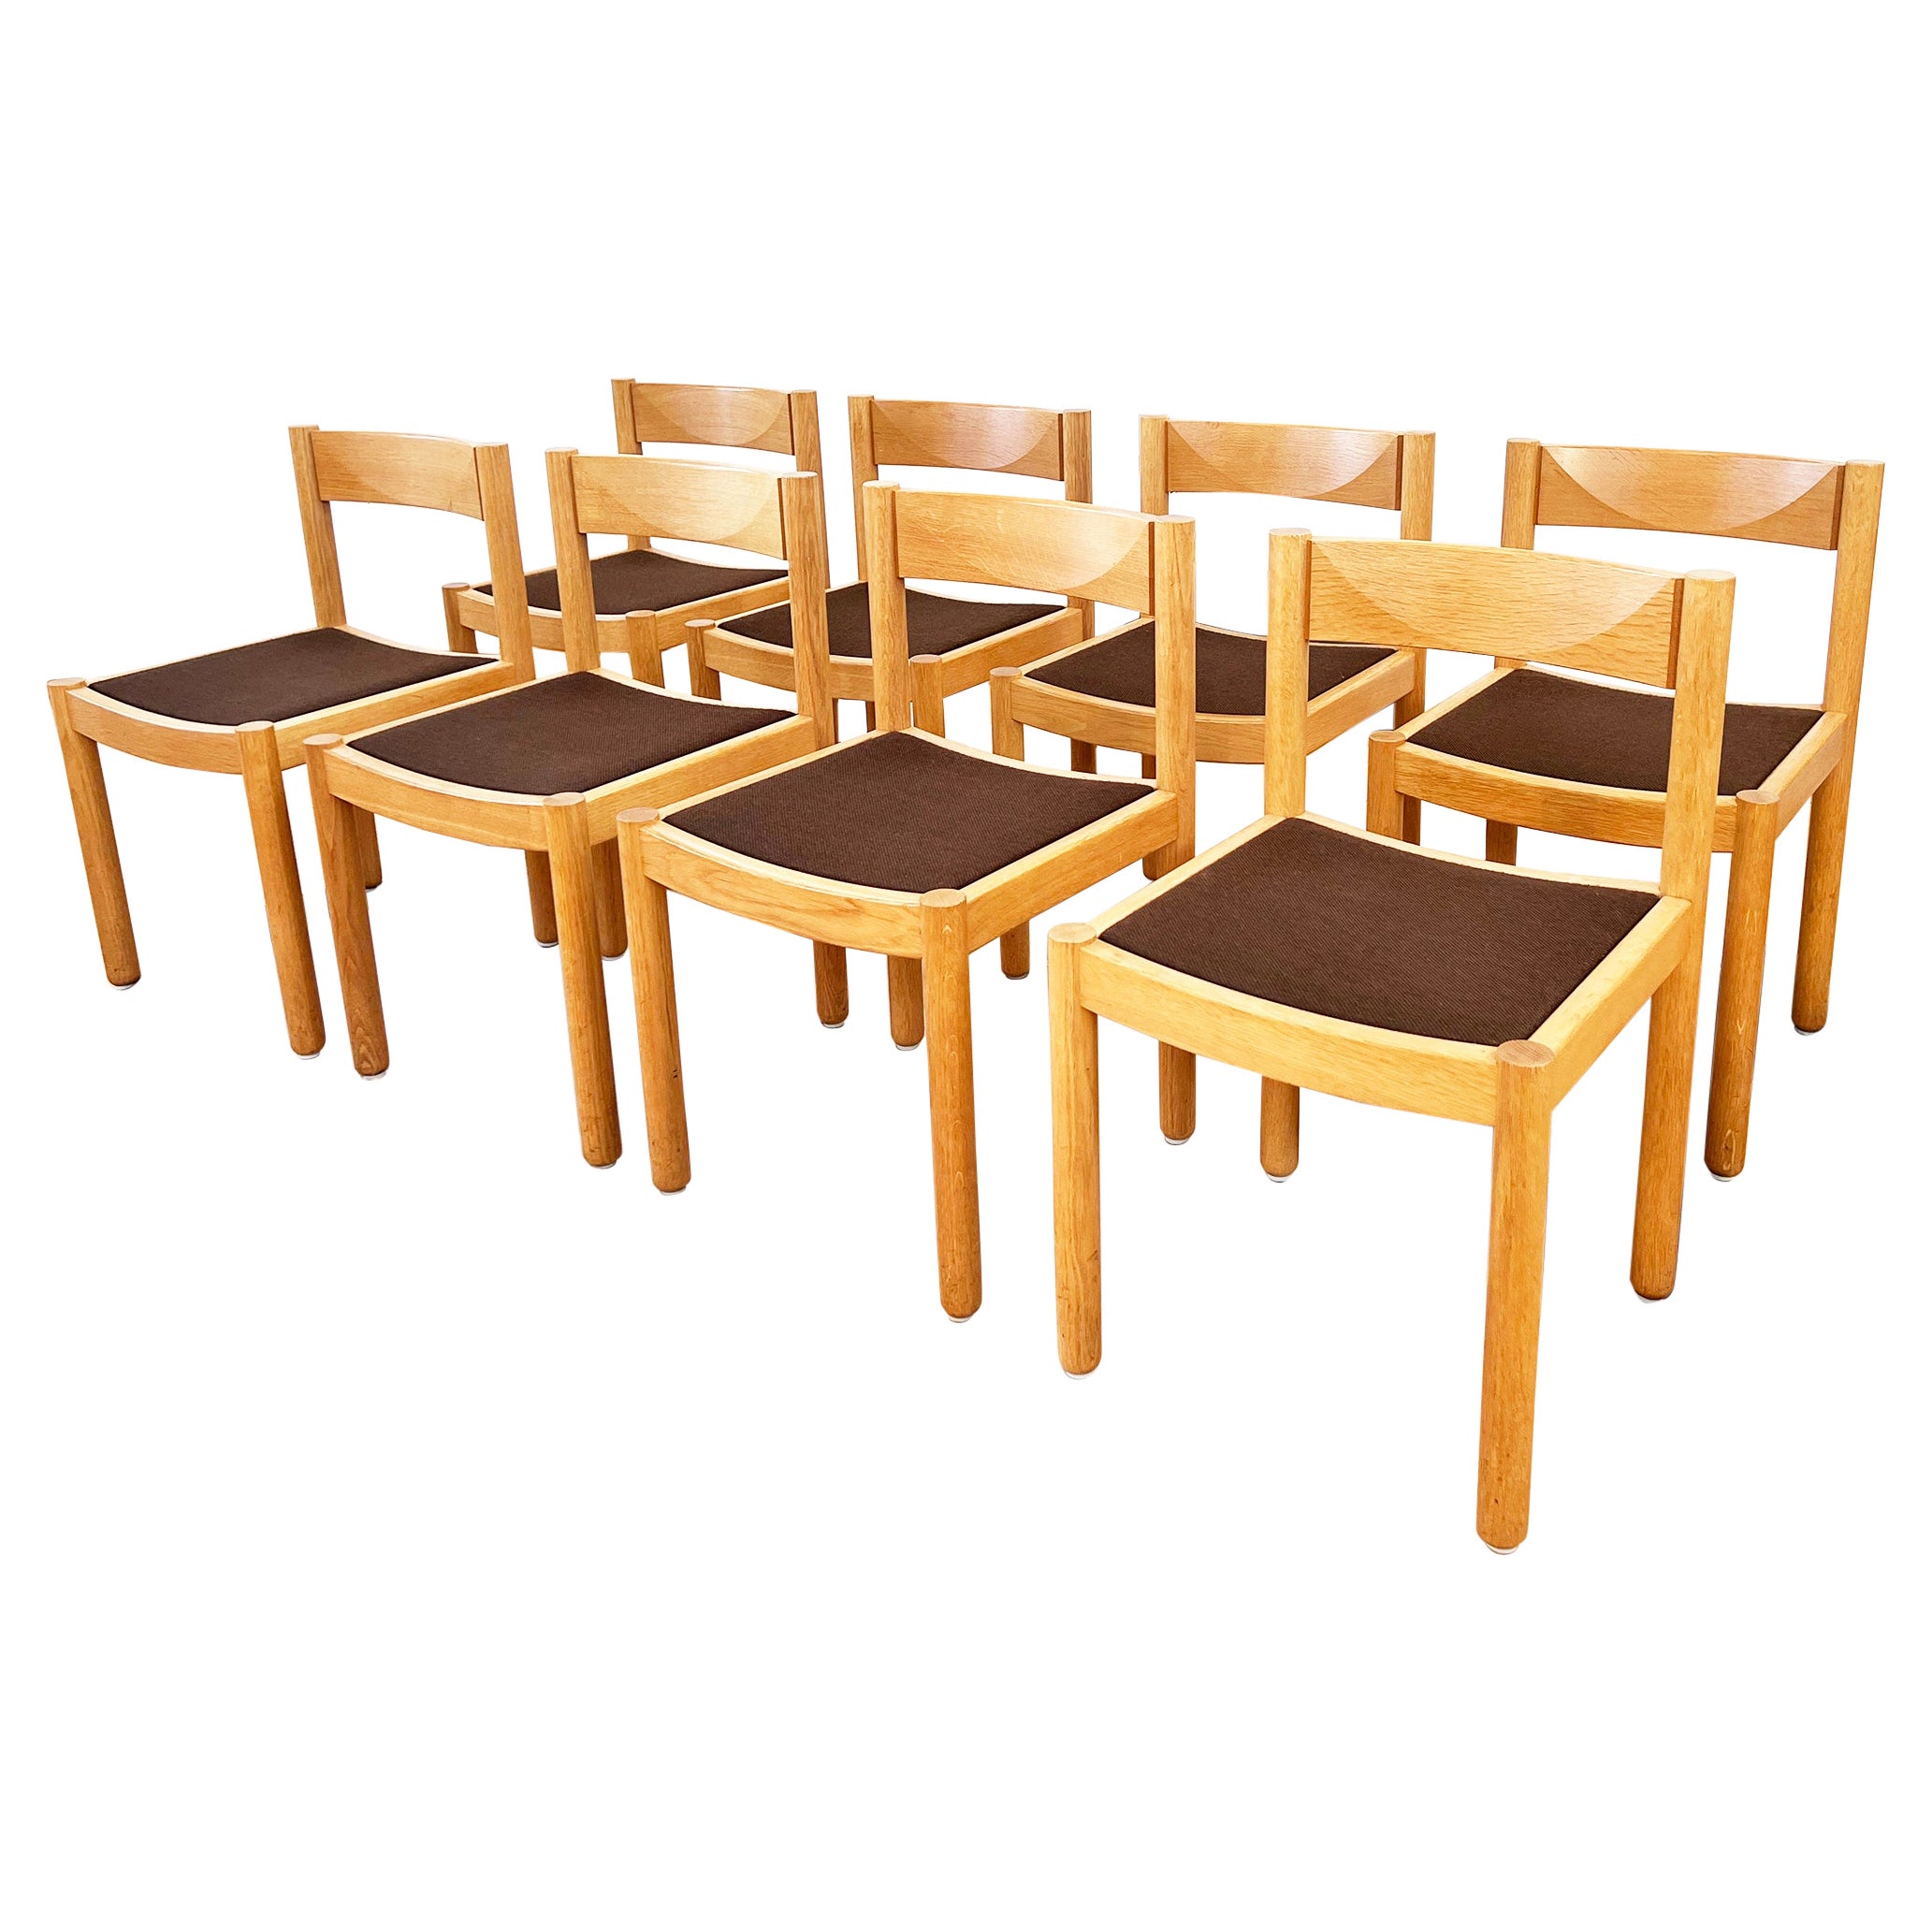 Robert and Trix Haussmann Oak Dining Chairs Midcentury 1963 Set of Six, 8 Pcs For Sale